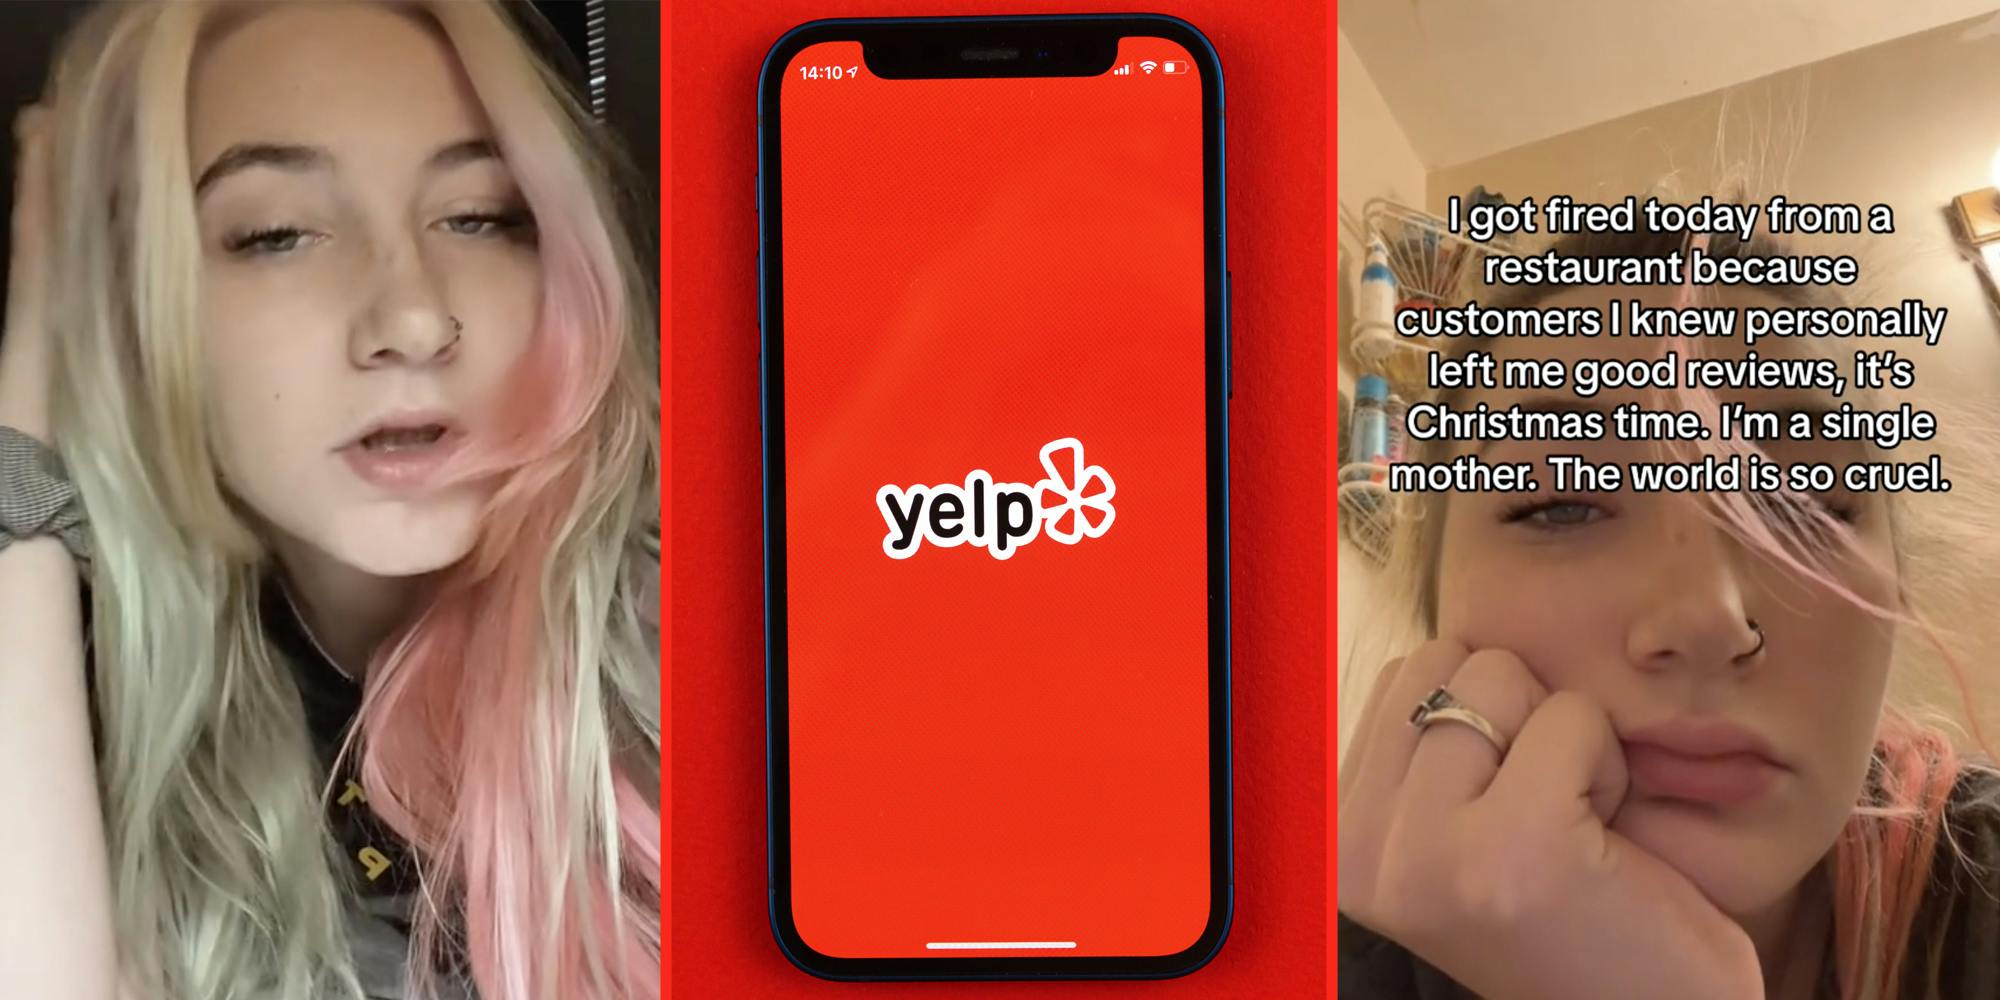 Woman talking(l), Yelp app on phone(c), Text over woman's face(r)